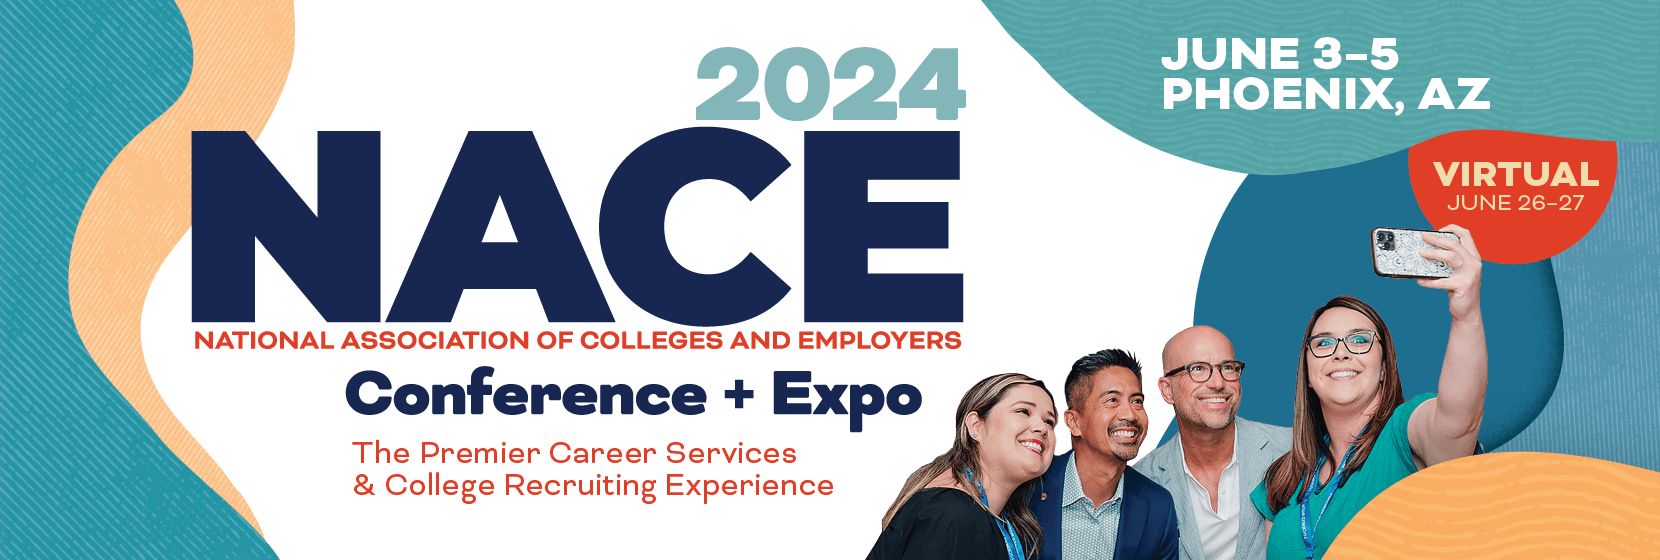 2024 NACE Conference & Expo The Premier Career Services & College